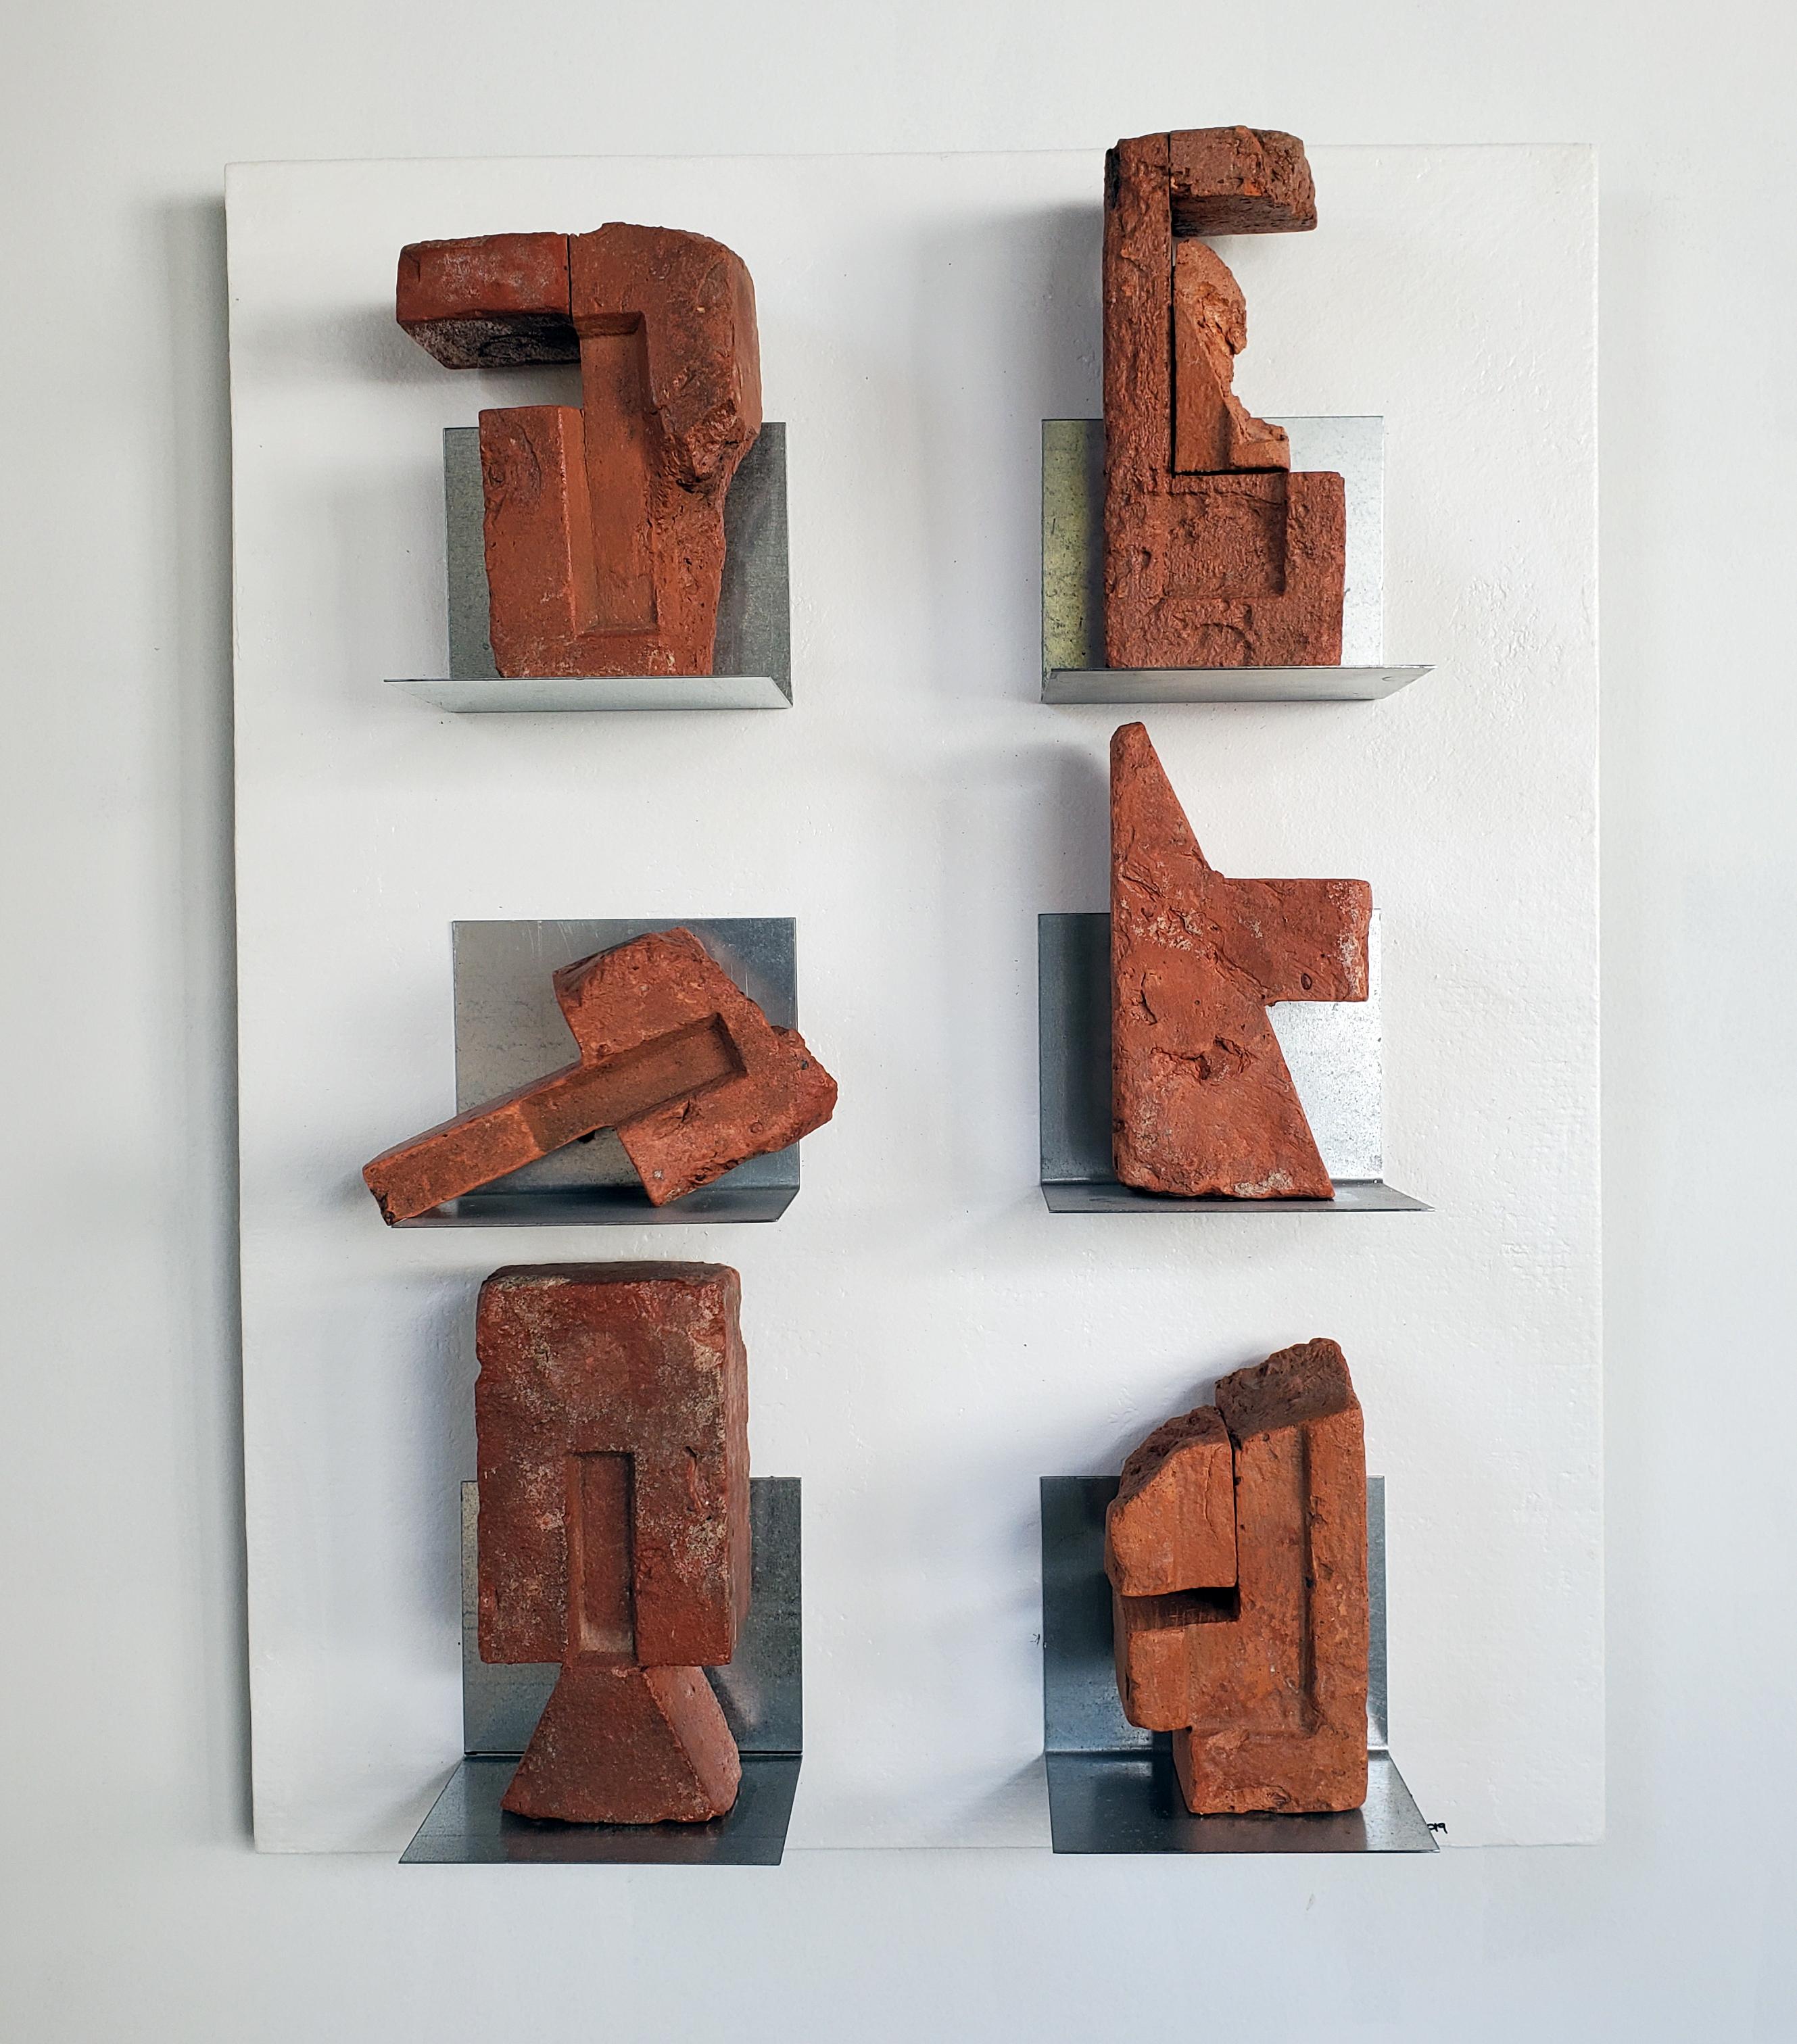 Mark Beltchenko Studio Abstract Sculpture - Compelling wall relief sculpture creates artistic puzzle, "Gallery of Misfits"